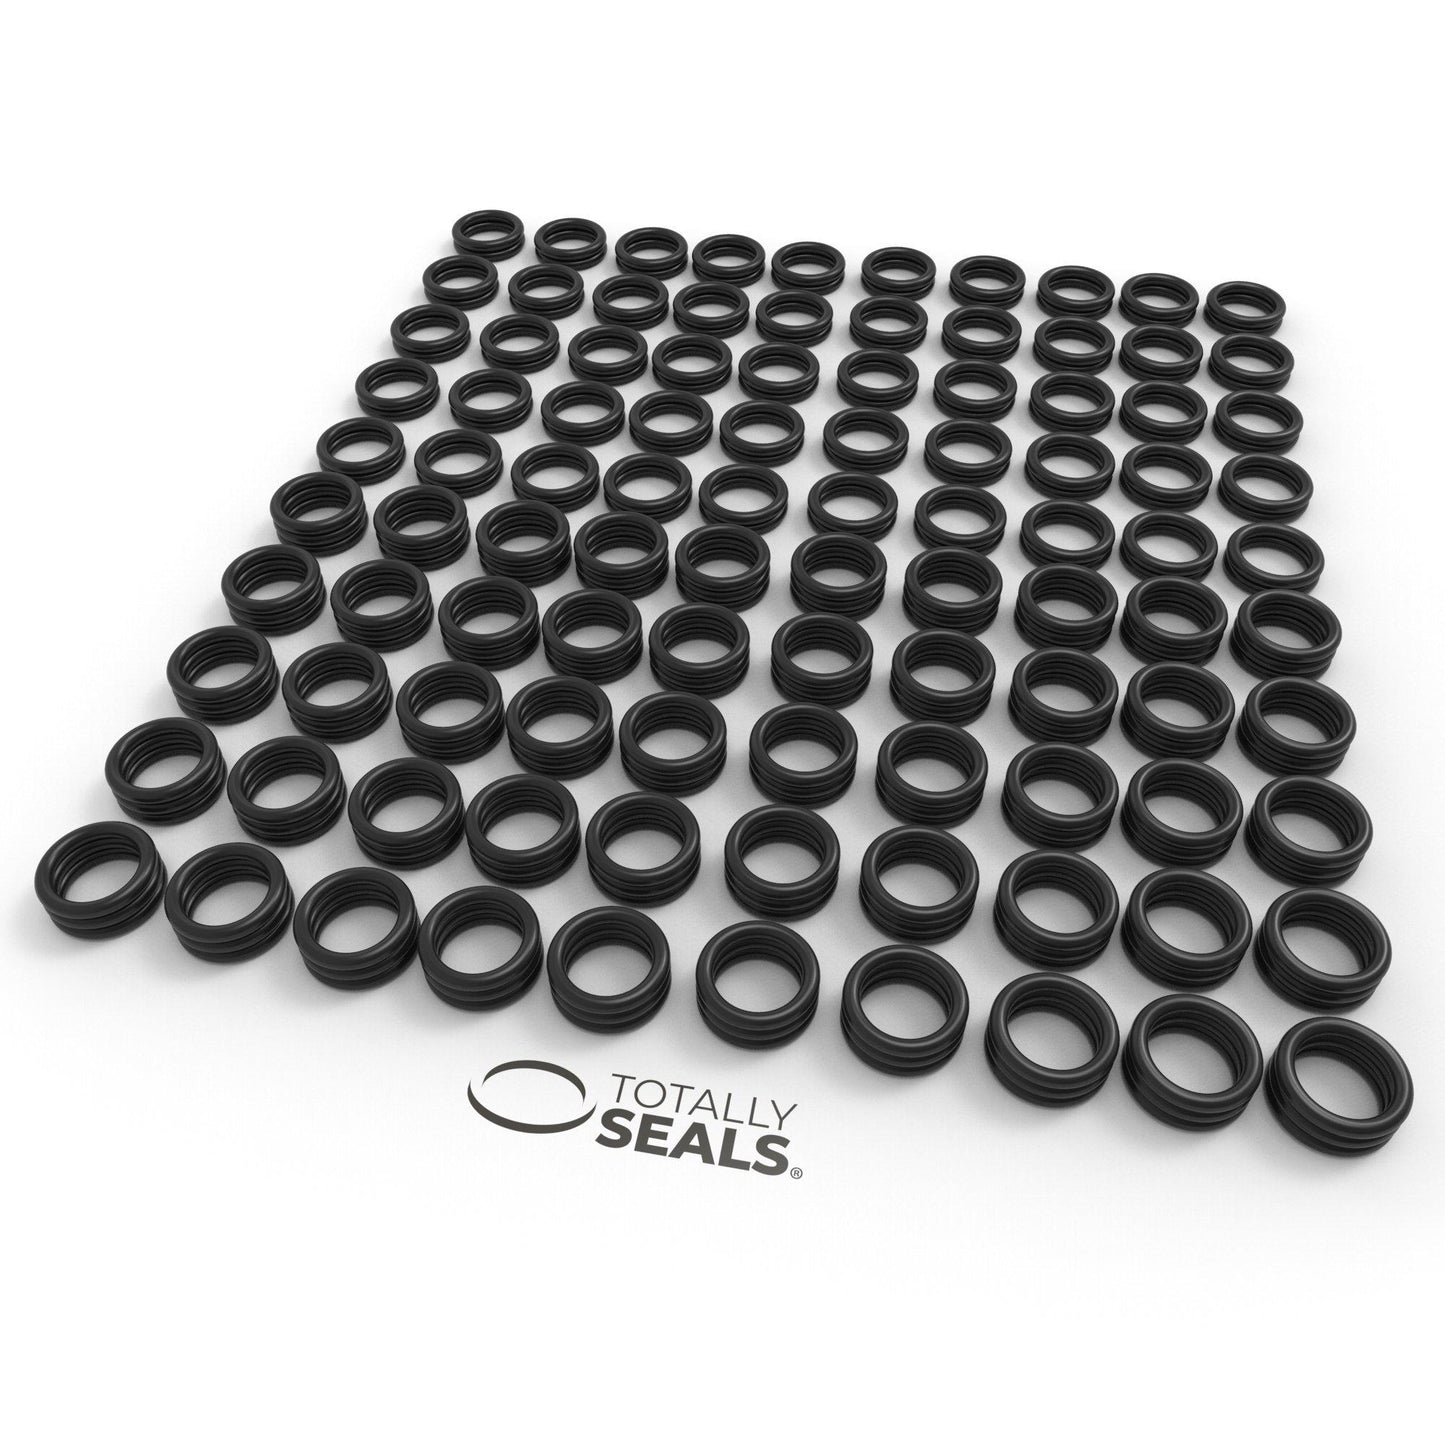 23mm x 1.5mm (26mm OD) Nitrile O-Rings - Totally Seals®